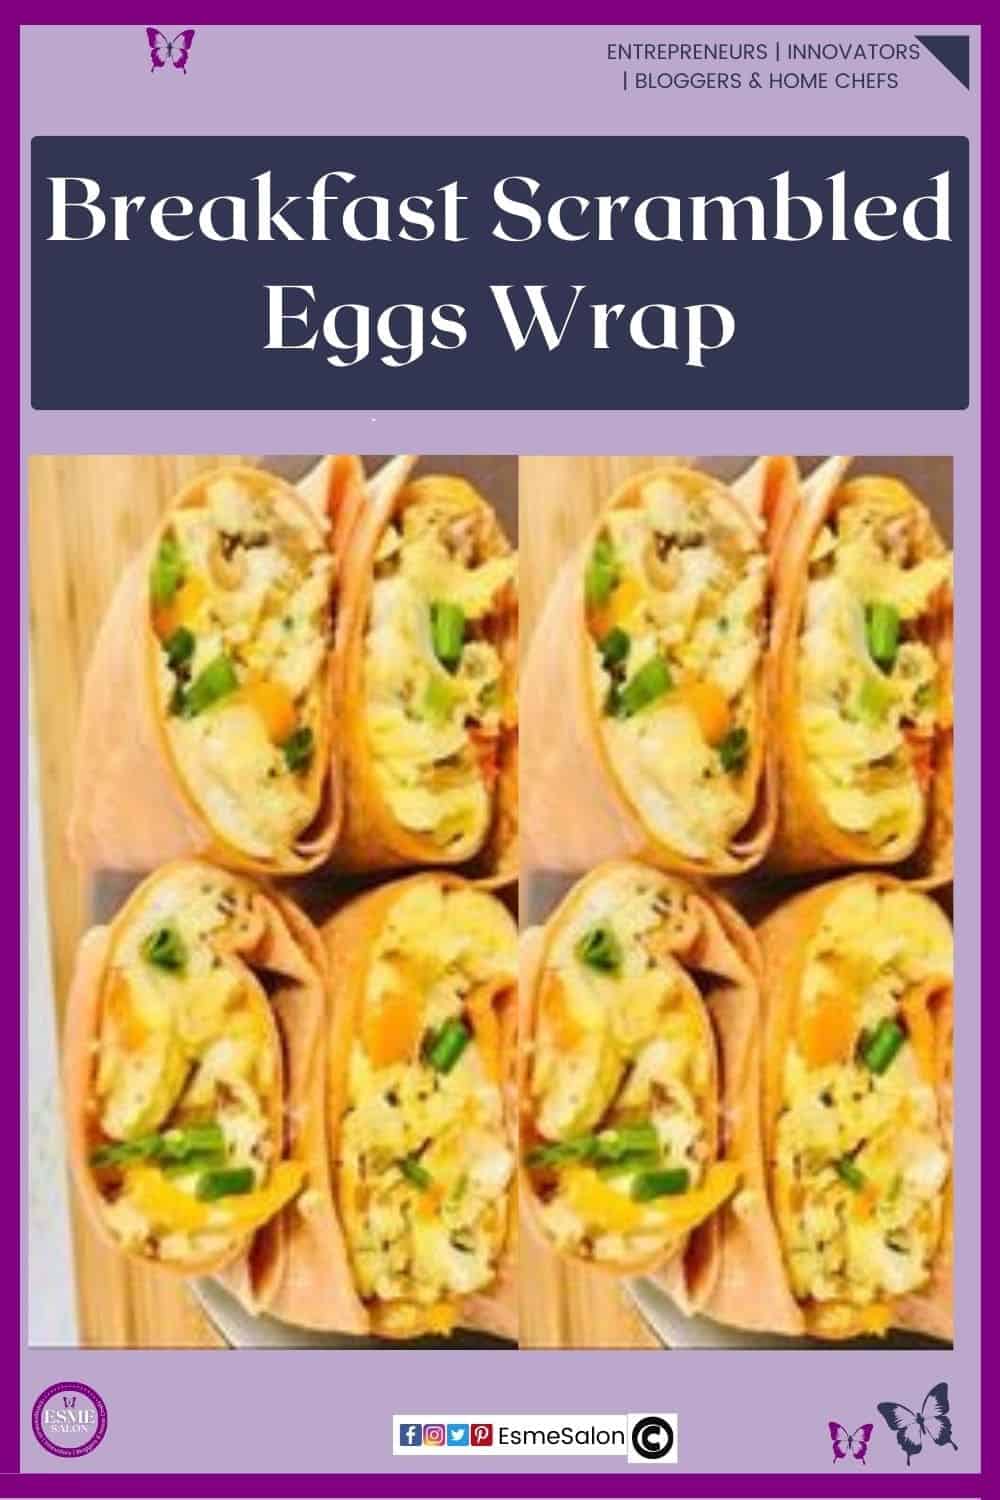 an image of 4 wraps filled with scrambled eggs, onions and green peppers